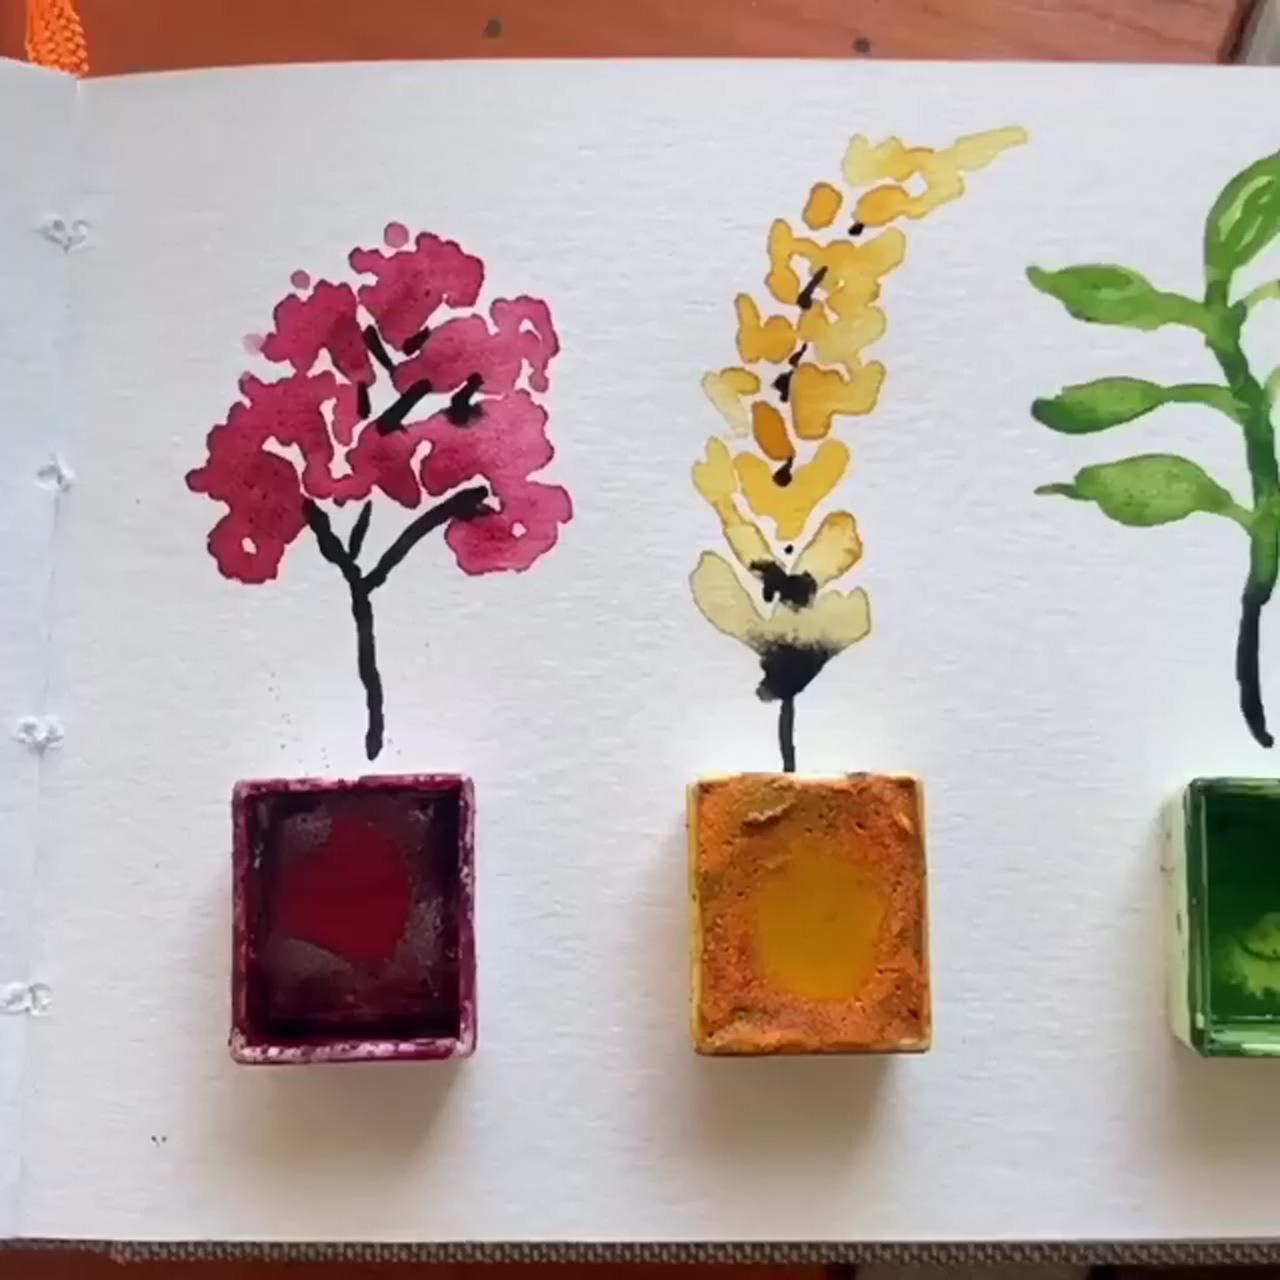 Beginner watercolor tutorial: how to paint with watercolors; easy watercolor